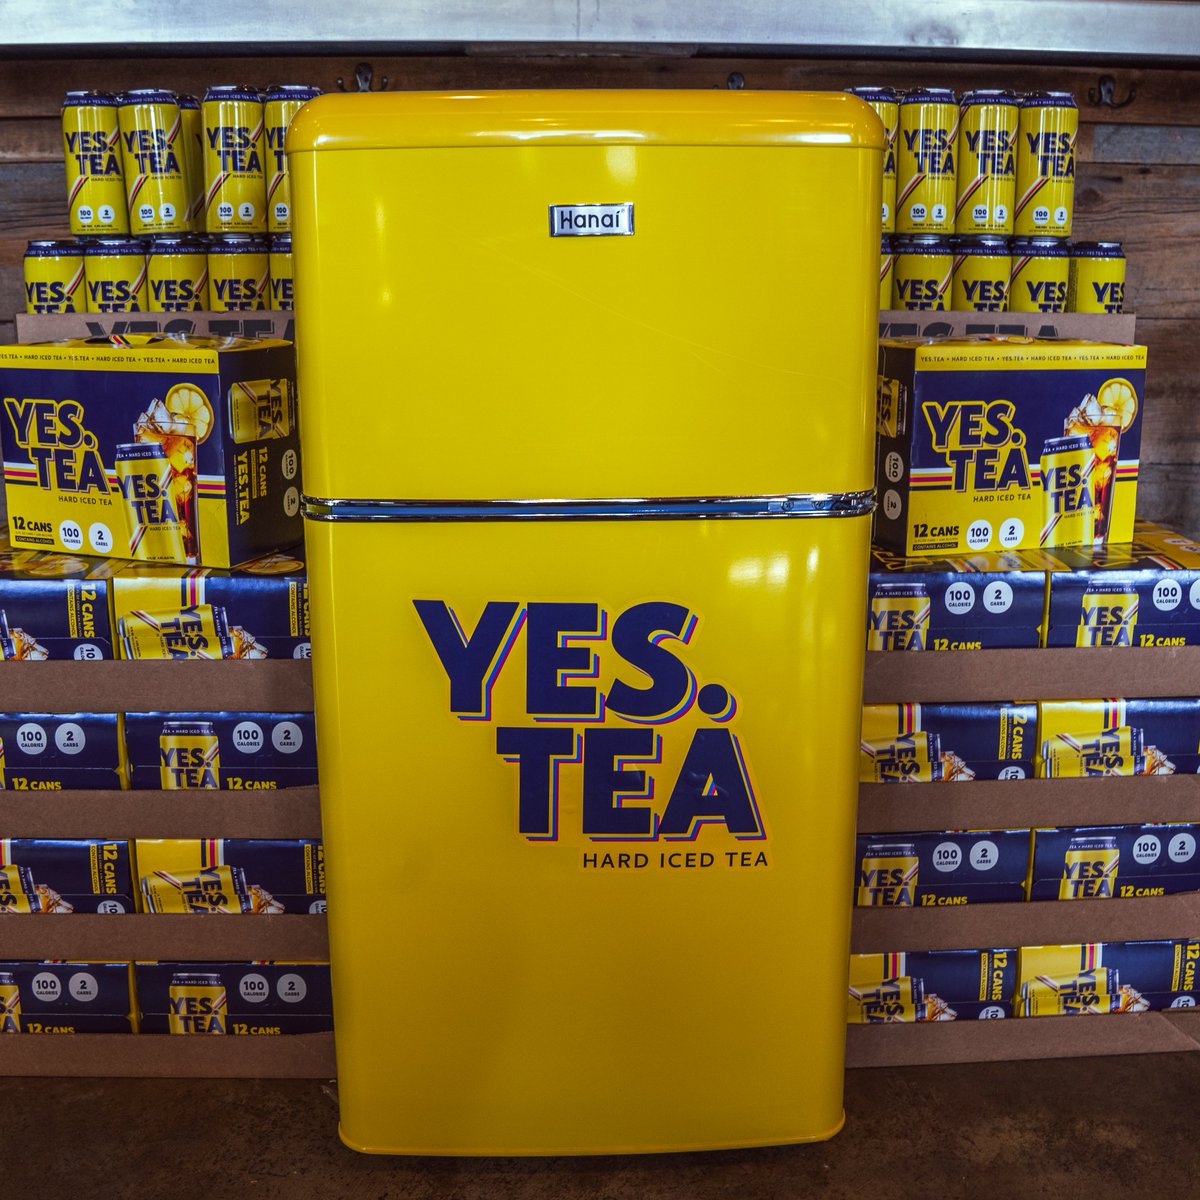 What's cooler than being cool? ICED TEA! YES.TEA is popping up all over the St. Louis area this week! Crafted using real black tea and all-natural ingredients including zesty lemon, YES.TEA is extraordinarily refreshing and perfect for backyard BBQs, picnics...